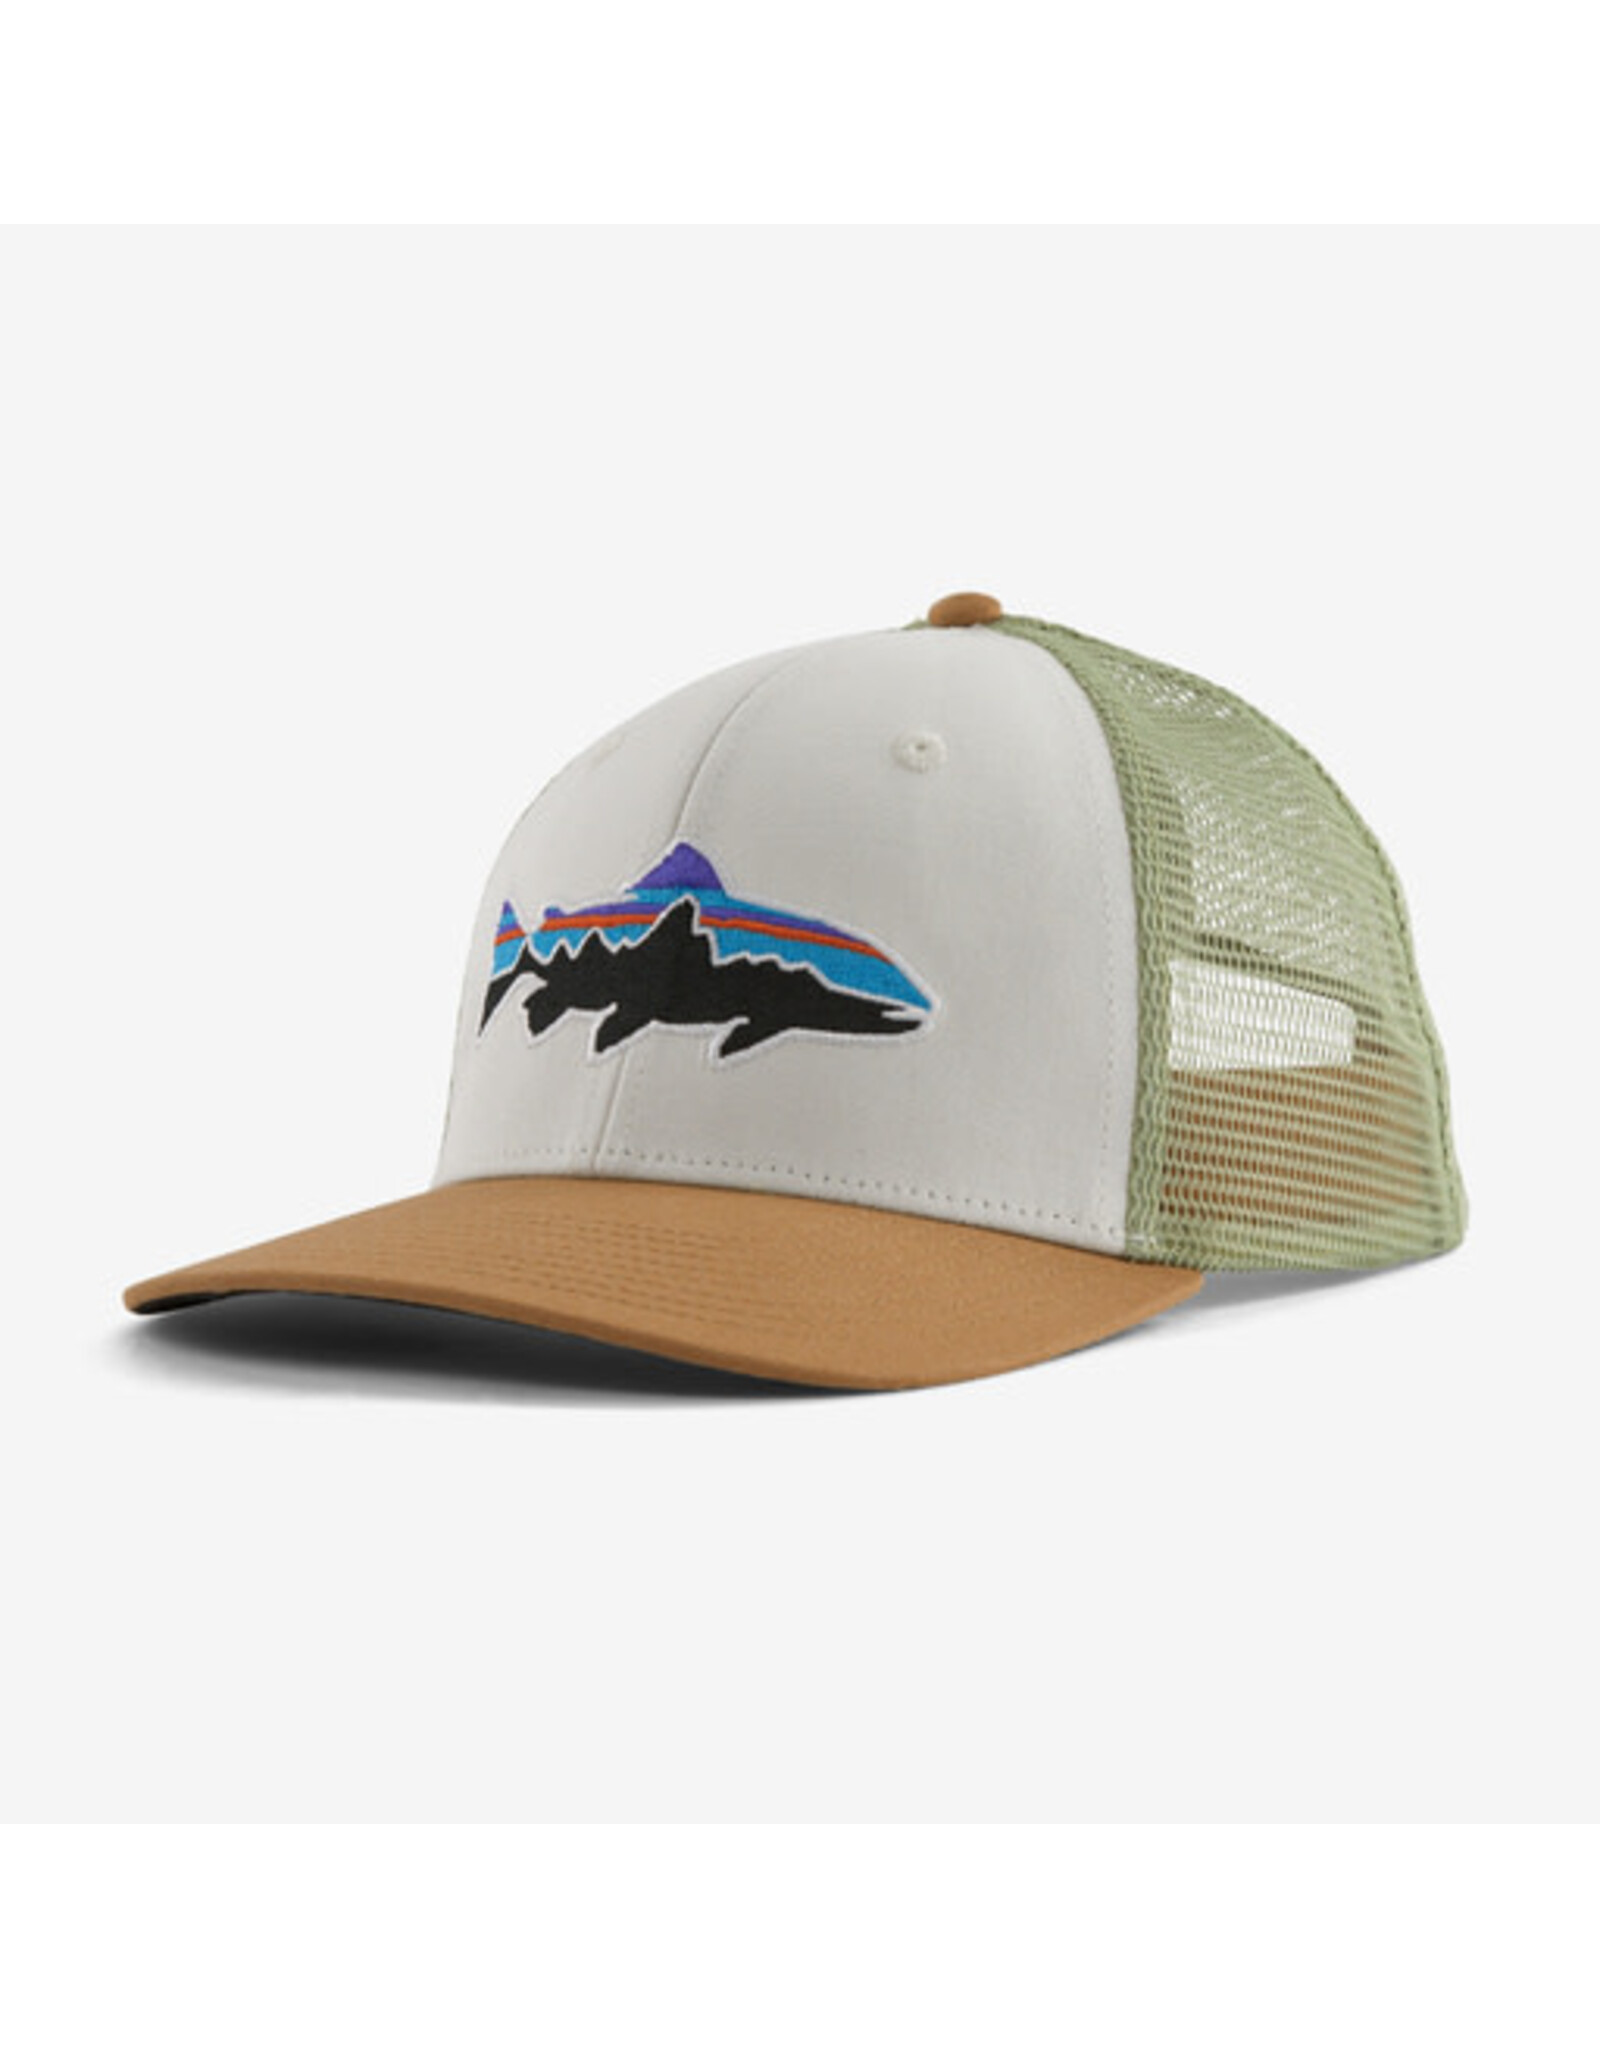 Patagonia Fitz Roy Trout Trucker Hat (White w/ Classic Tan) - Royal Gorge  Anglers